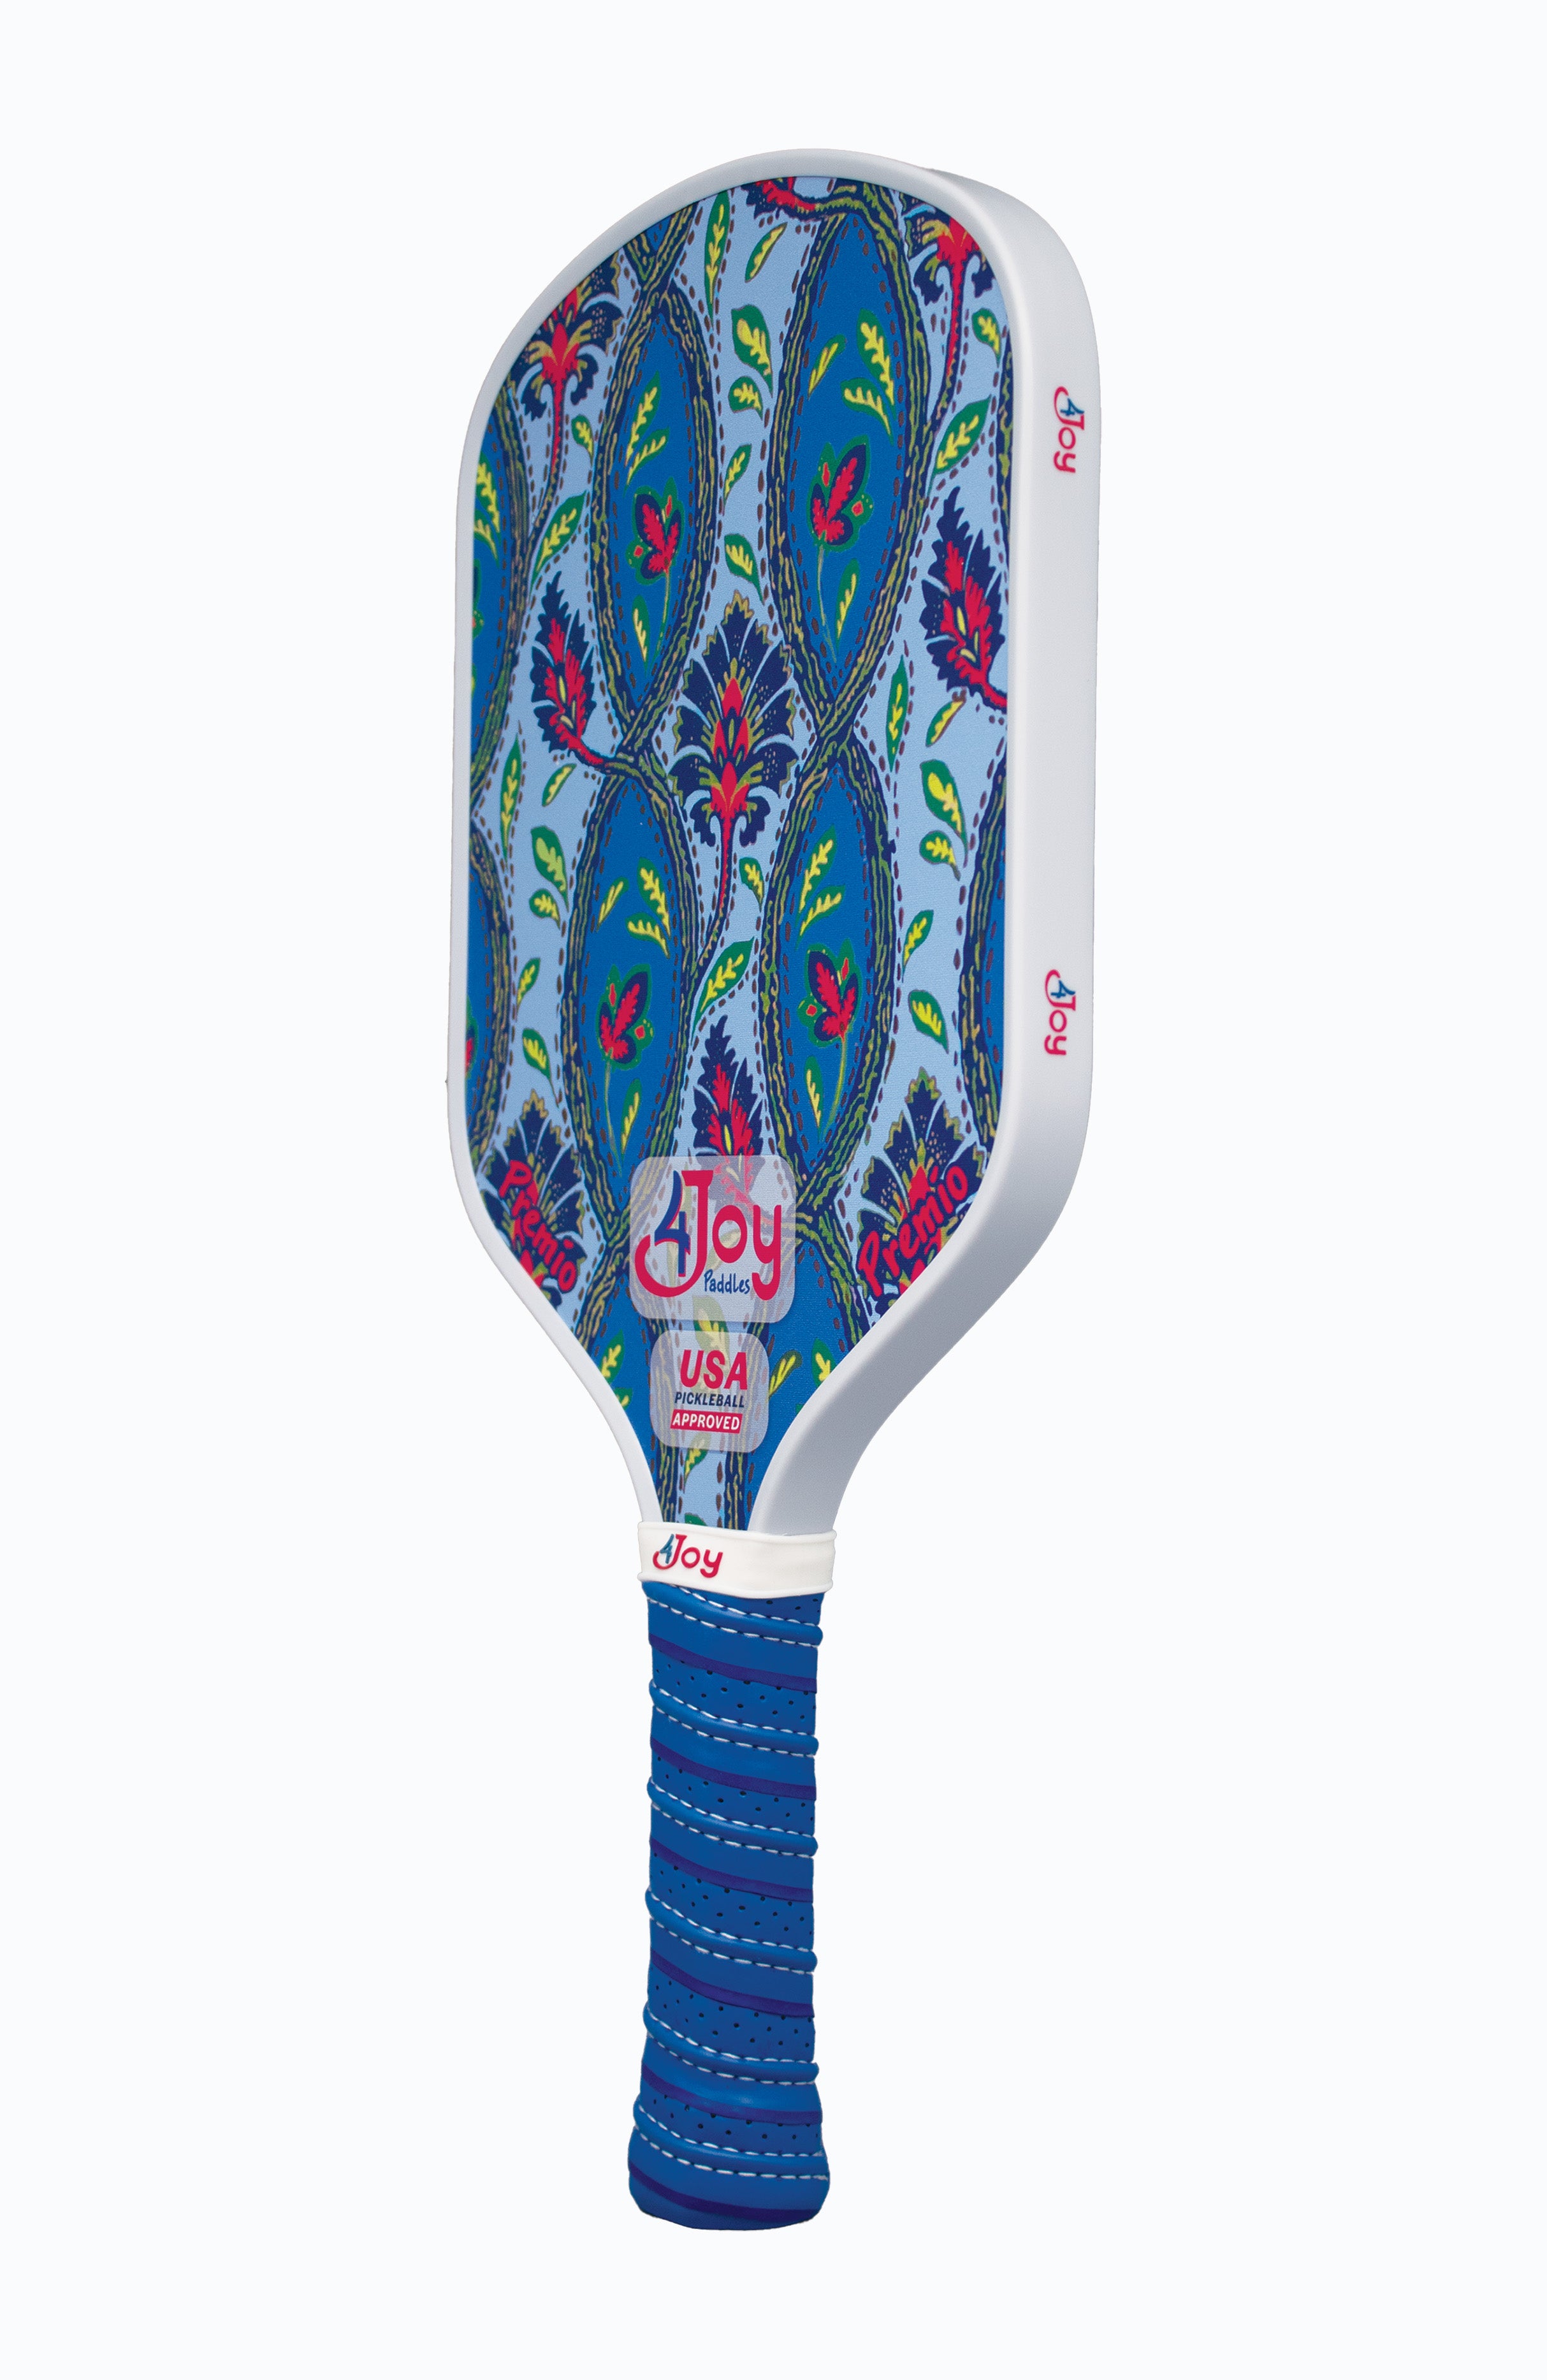 Stylish picklball paddle with artistic designs blues